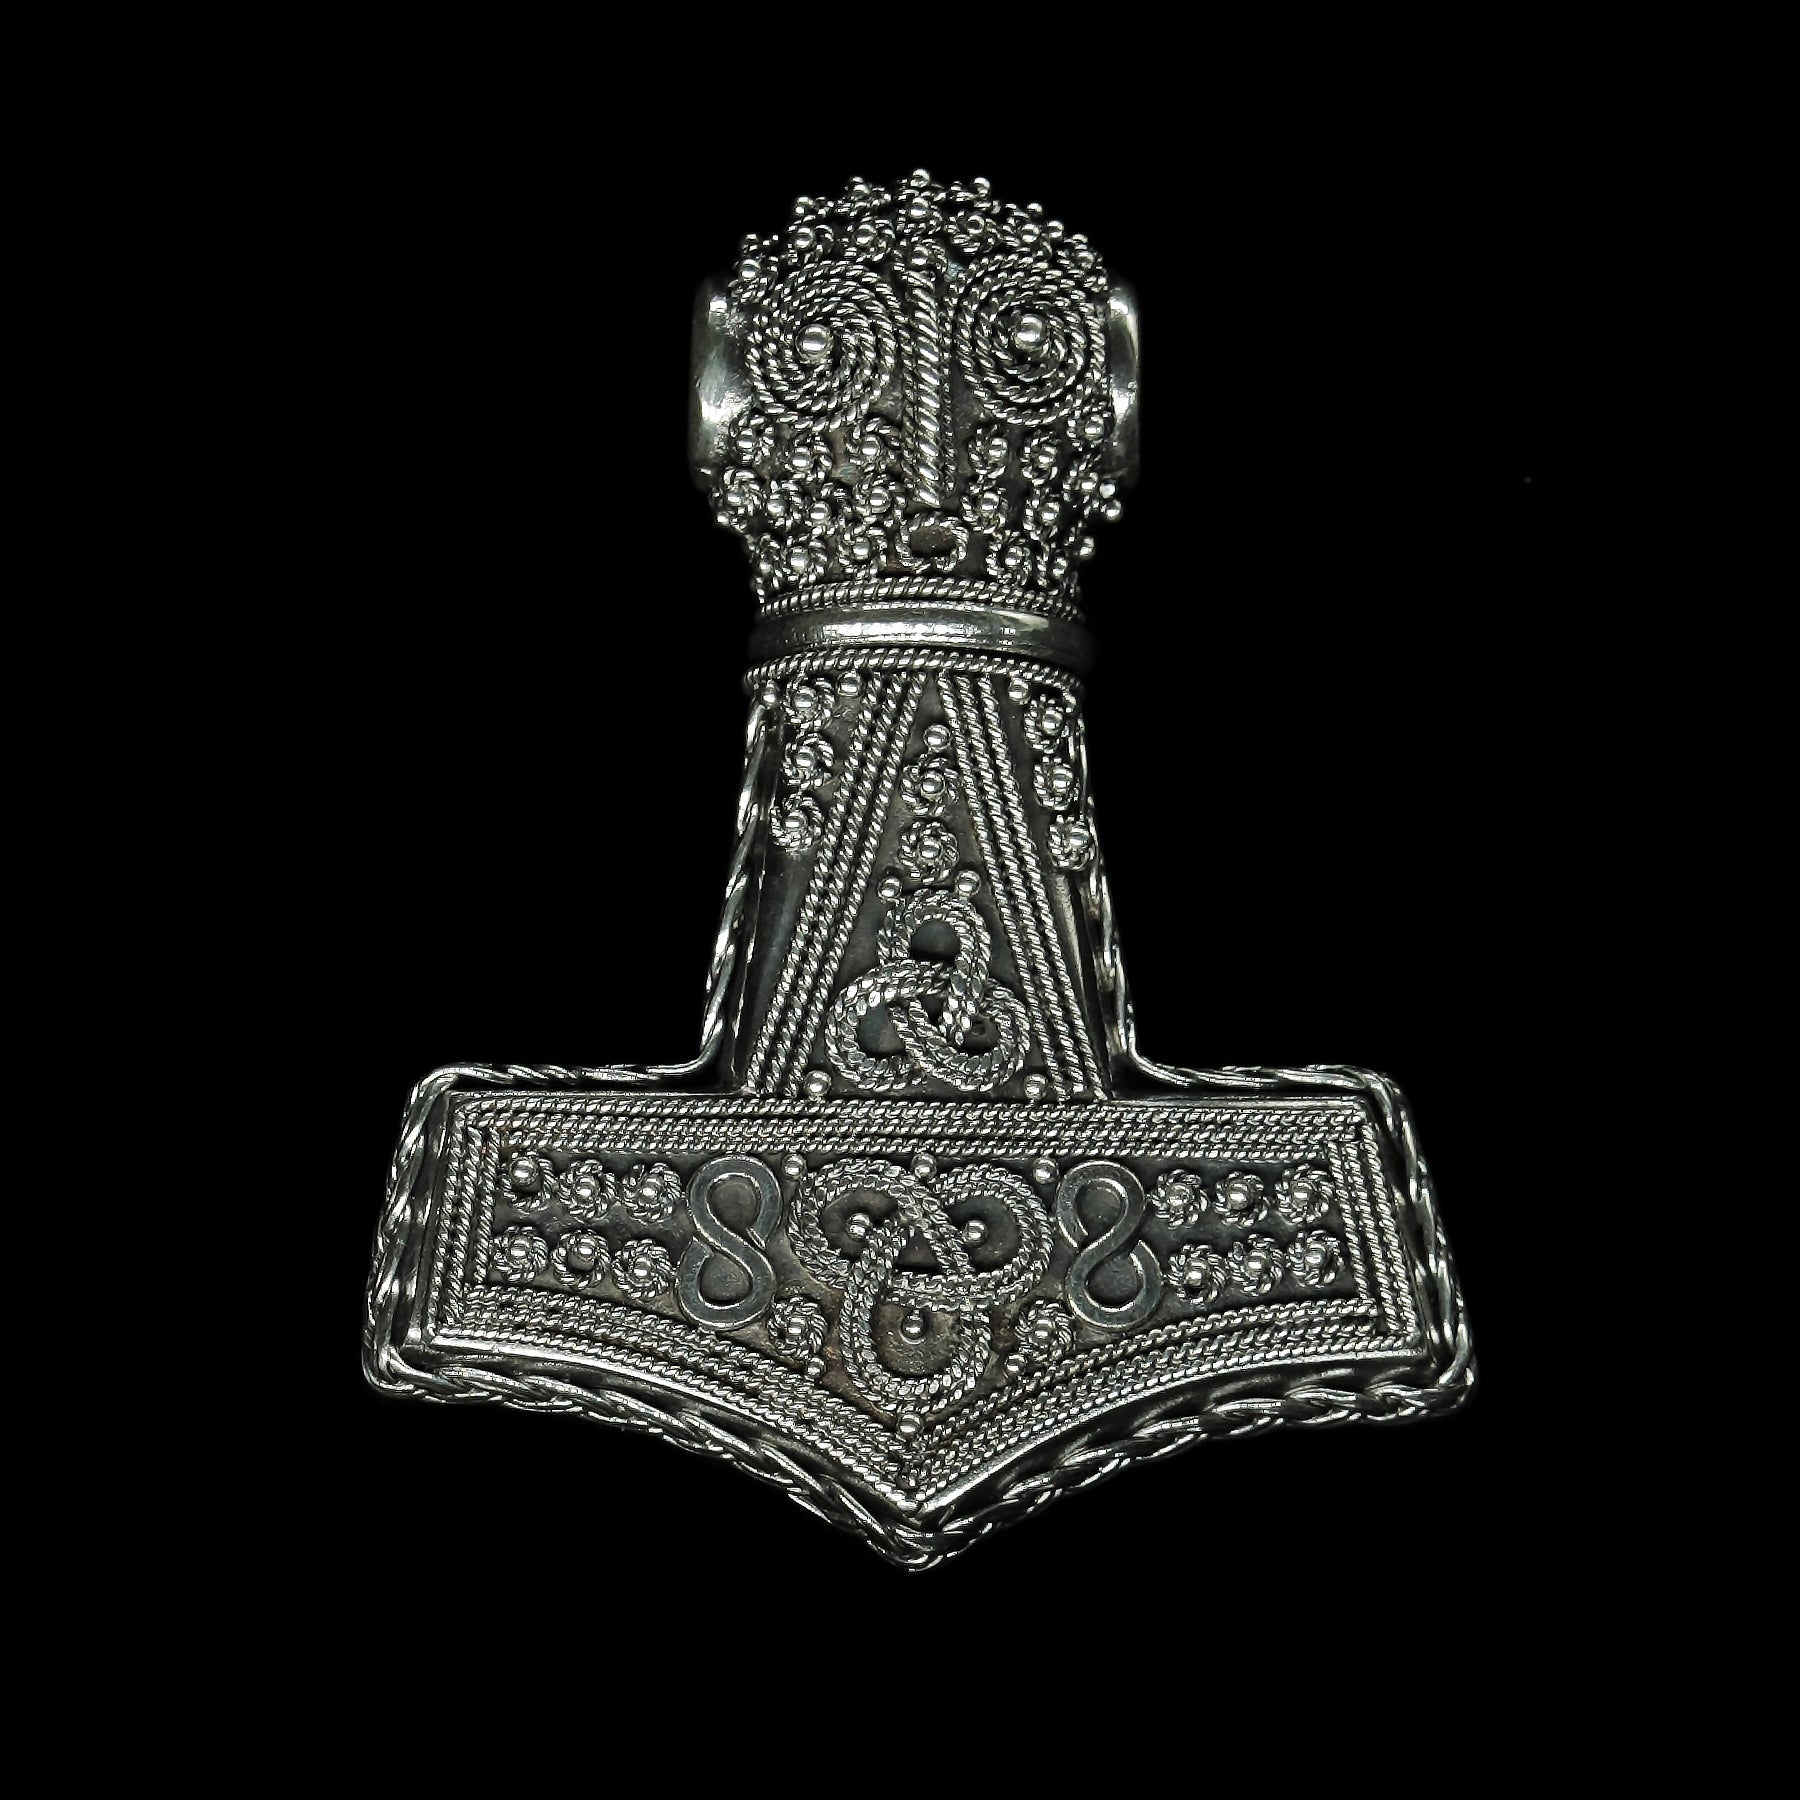 Large Silver Filigree Thors Hammer Pendant Replica from Öland